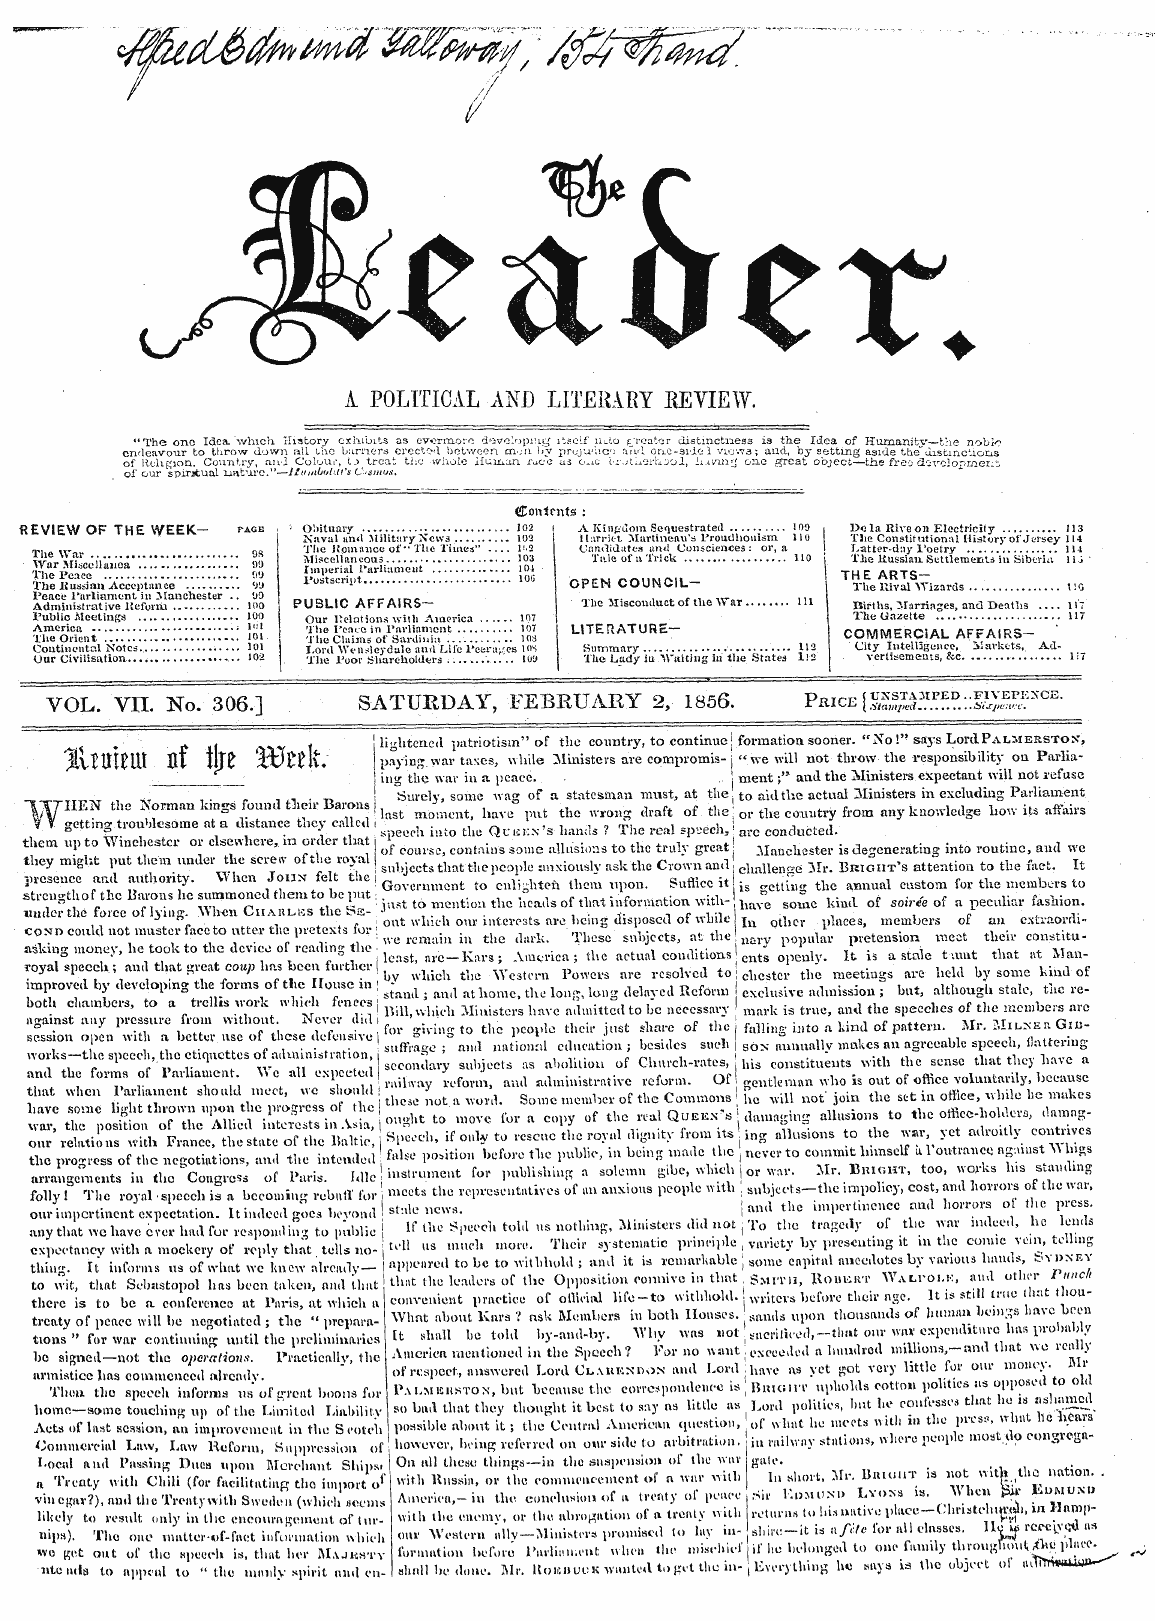 Leader (1850-1860): jS F Y, 2nd edition - Review Of The Week— Page , • Obituary 10...